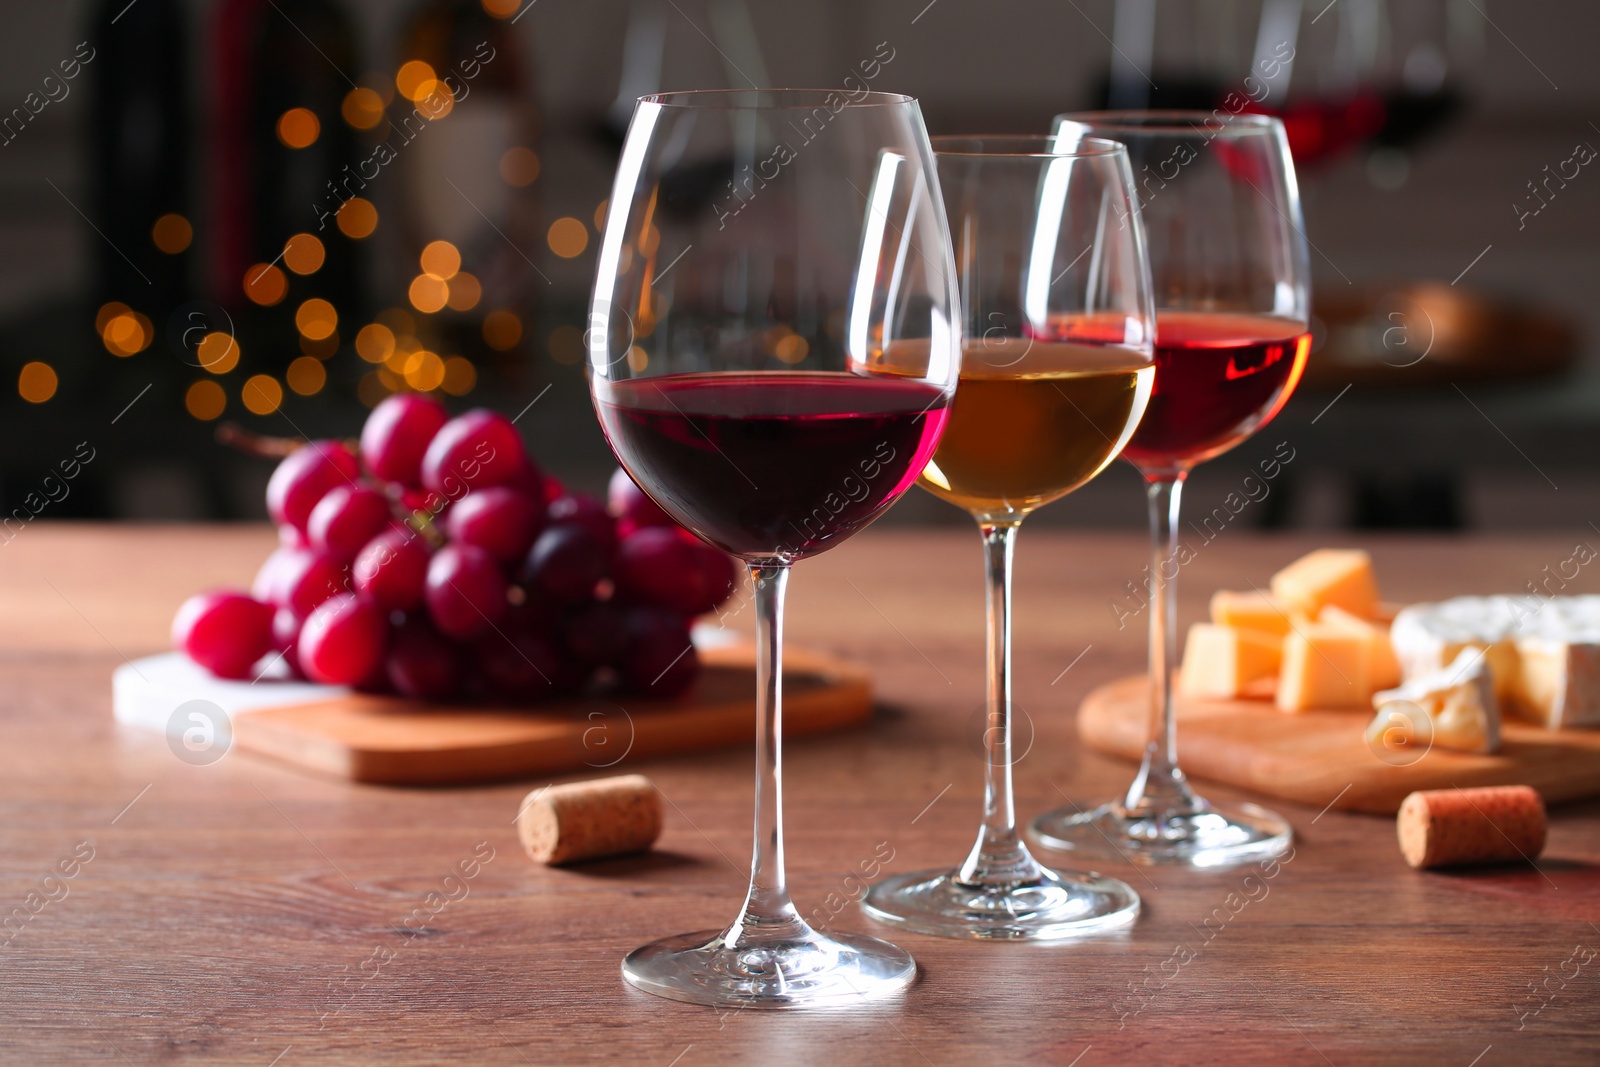 Photo of Glasses with different wines and appetizers on wooden table against blurred background. Space for text